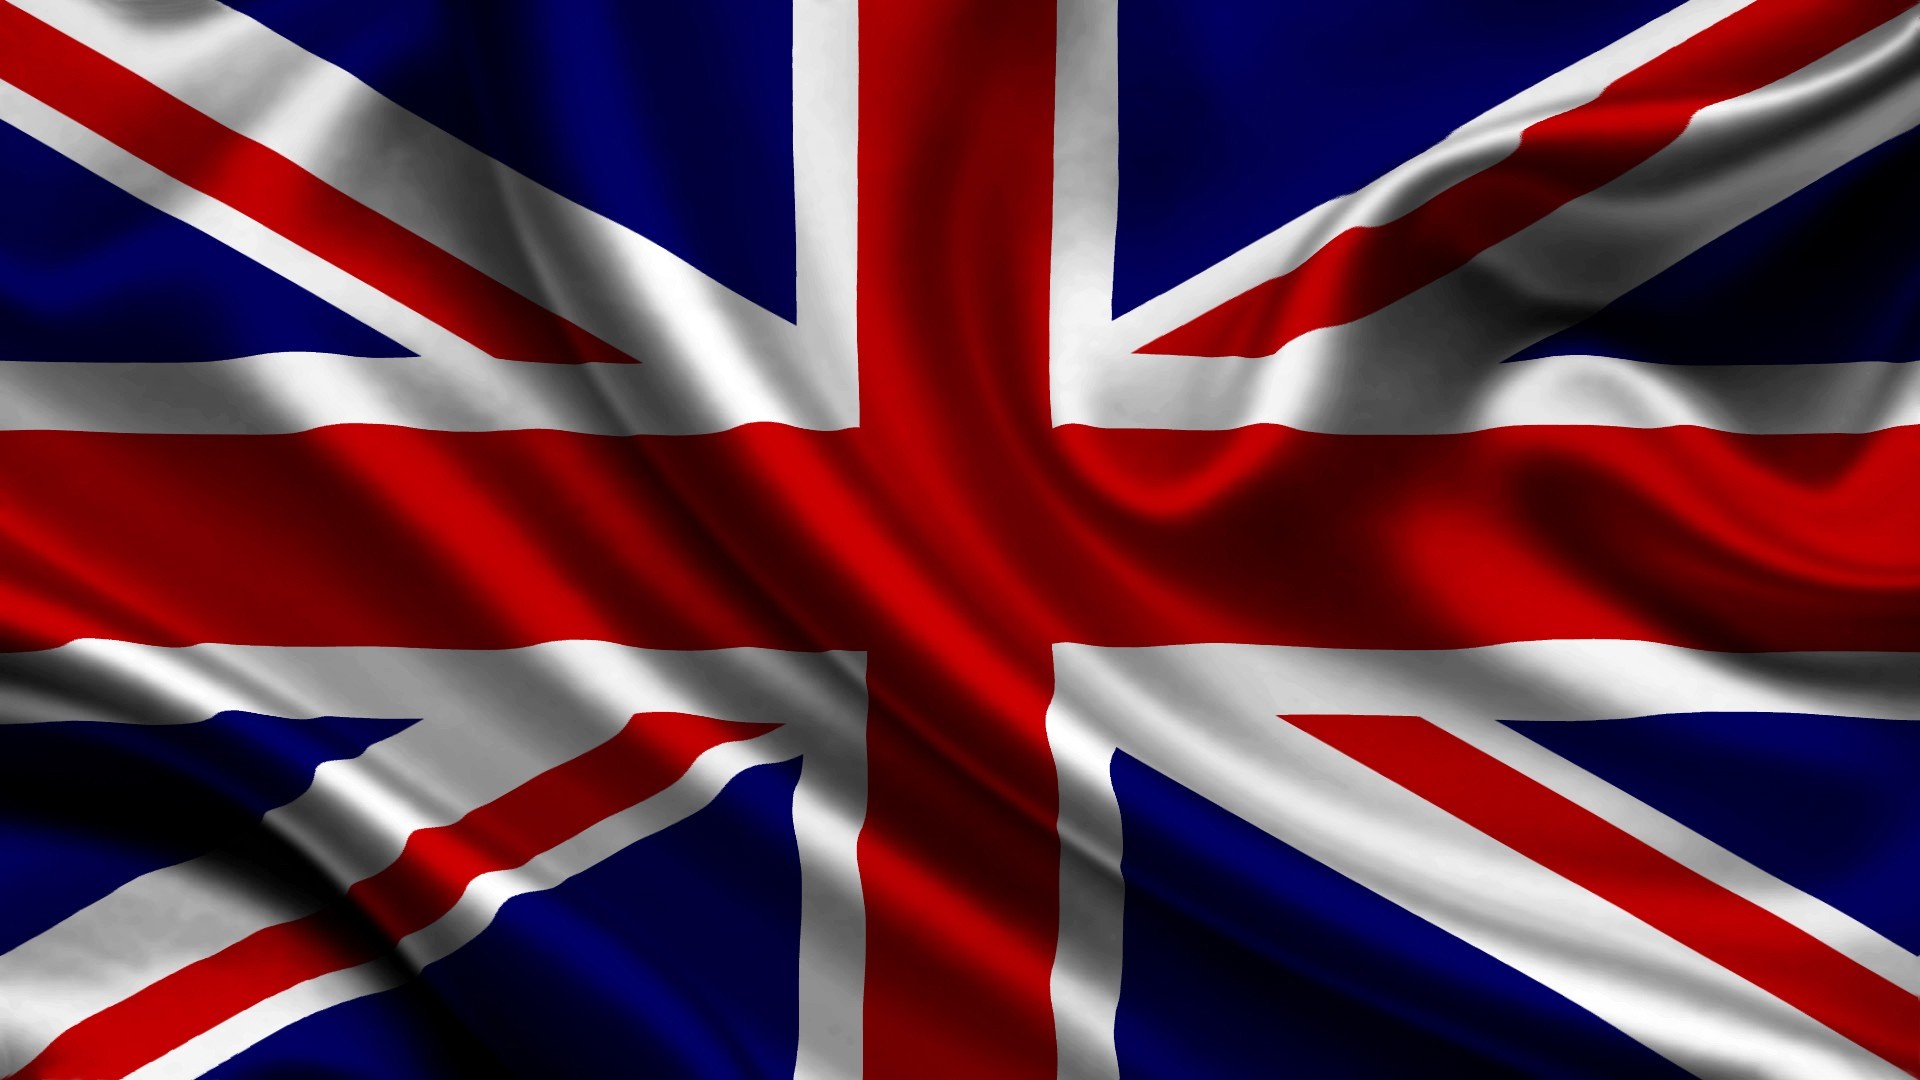 1920x1080 British Flag HD Wallpaper | England Flag Images | Cool Wallpapers